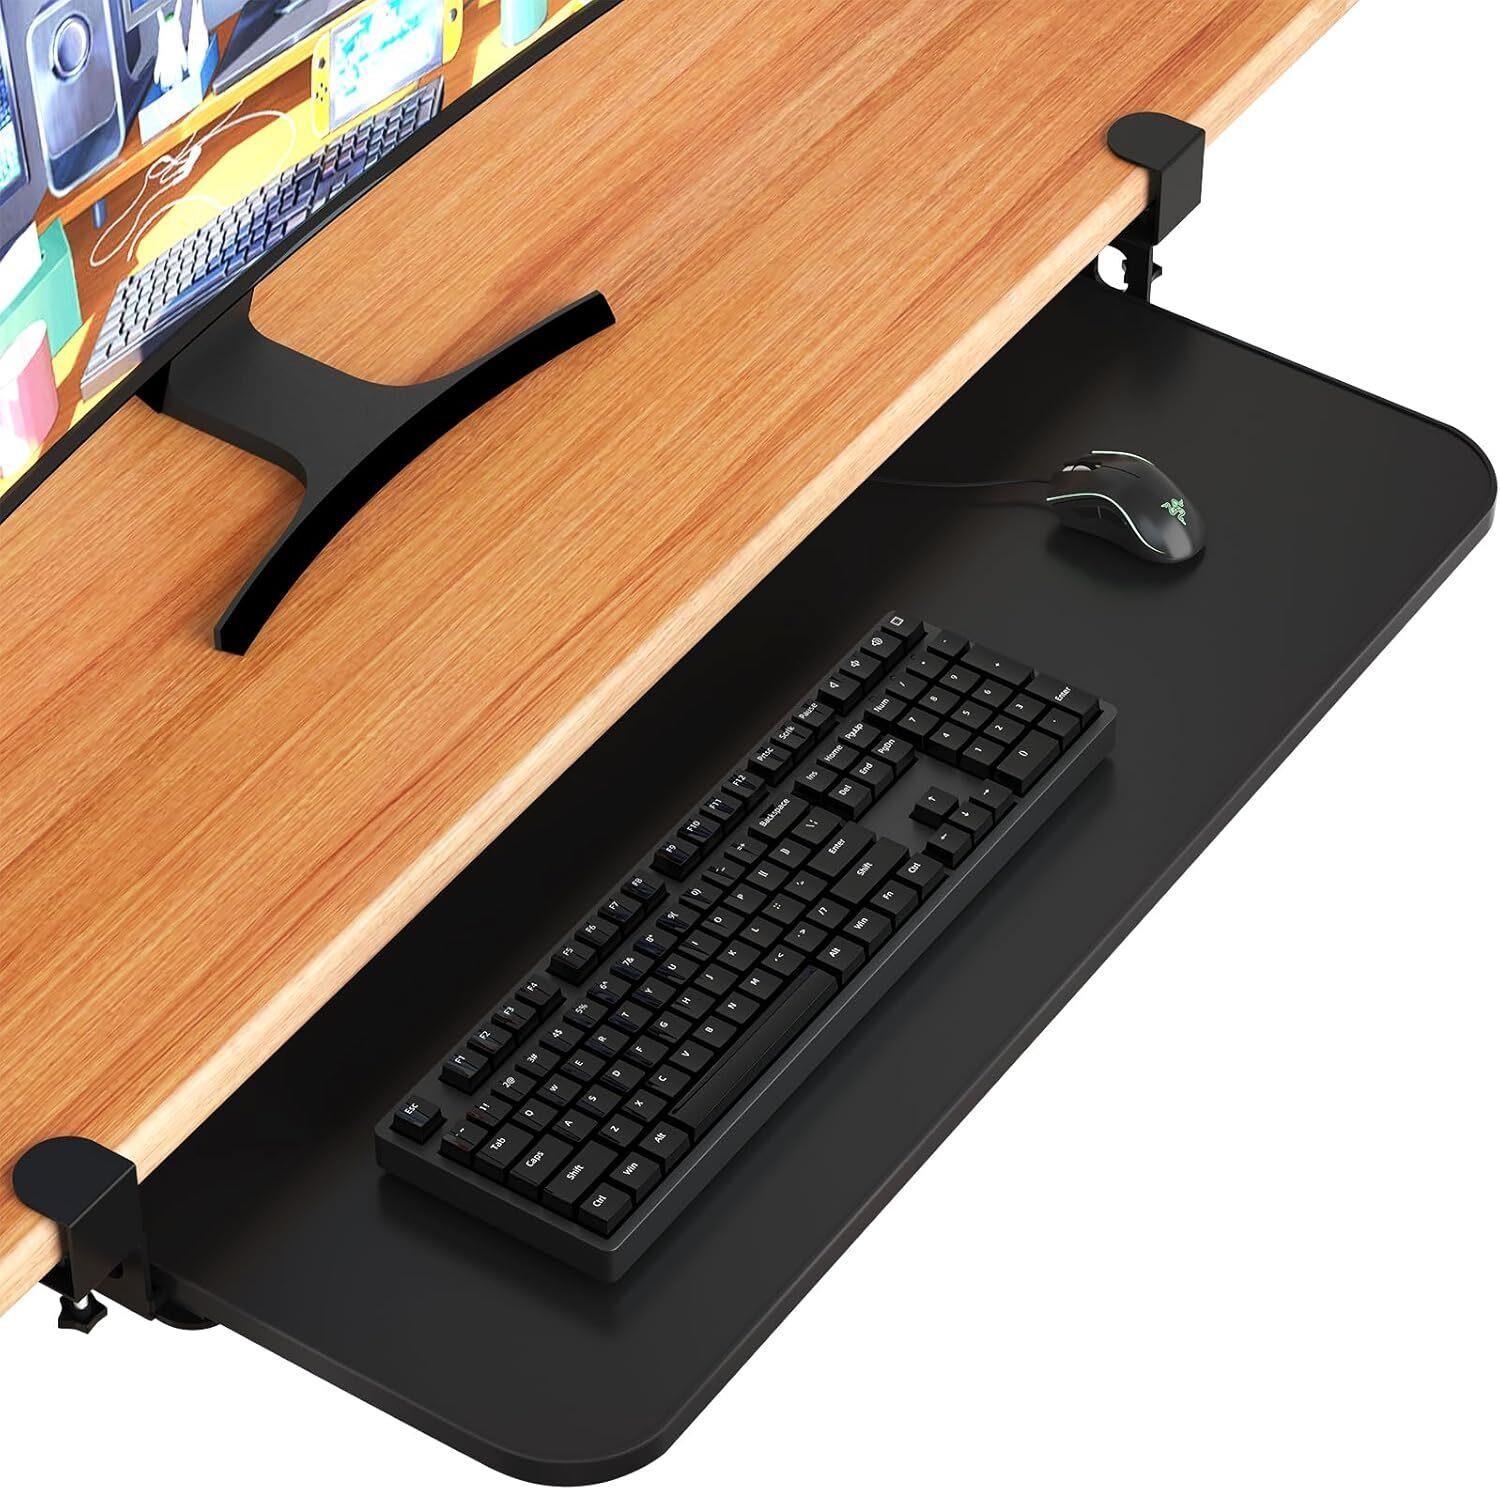 Keyboard Tray 25.7 X 9.8, Slide Out with C Clamp